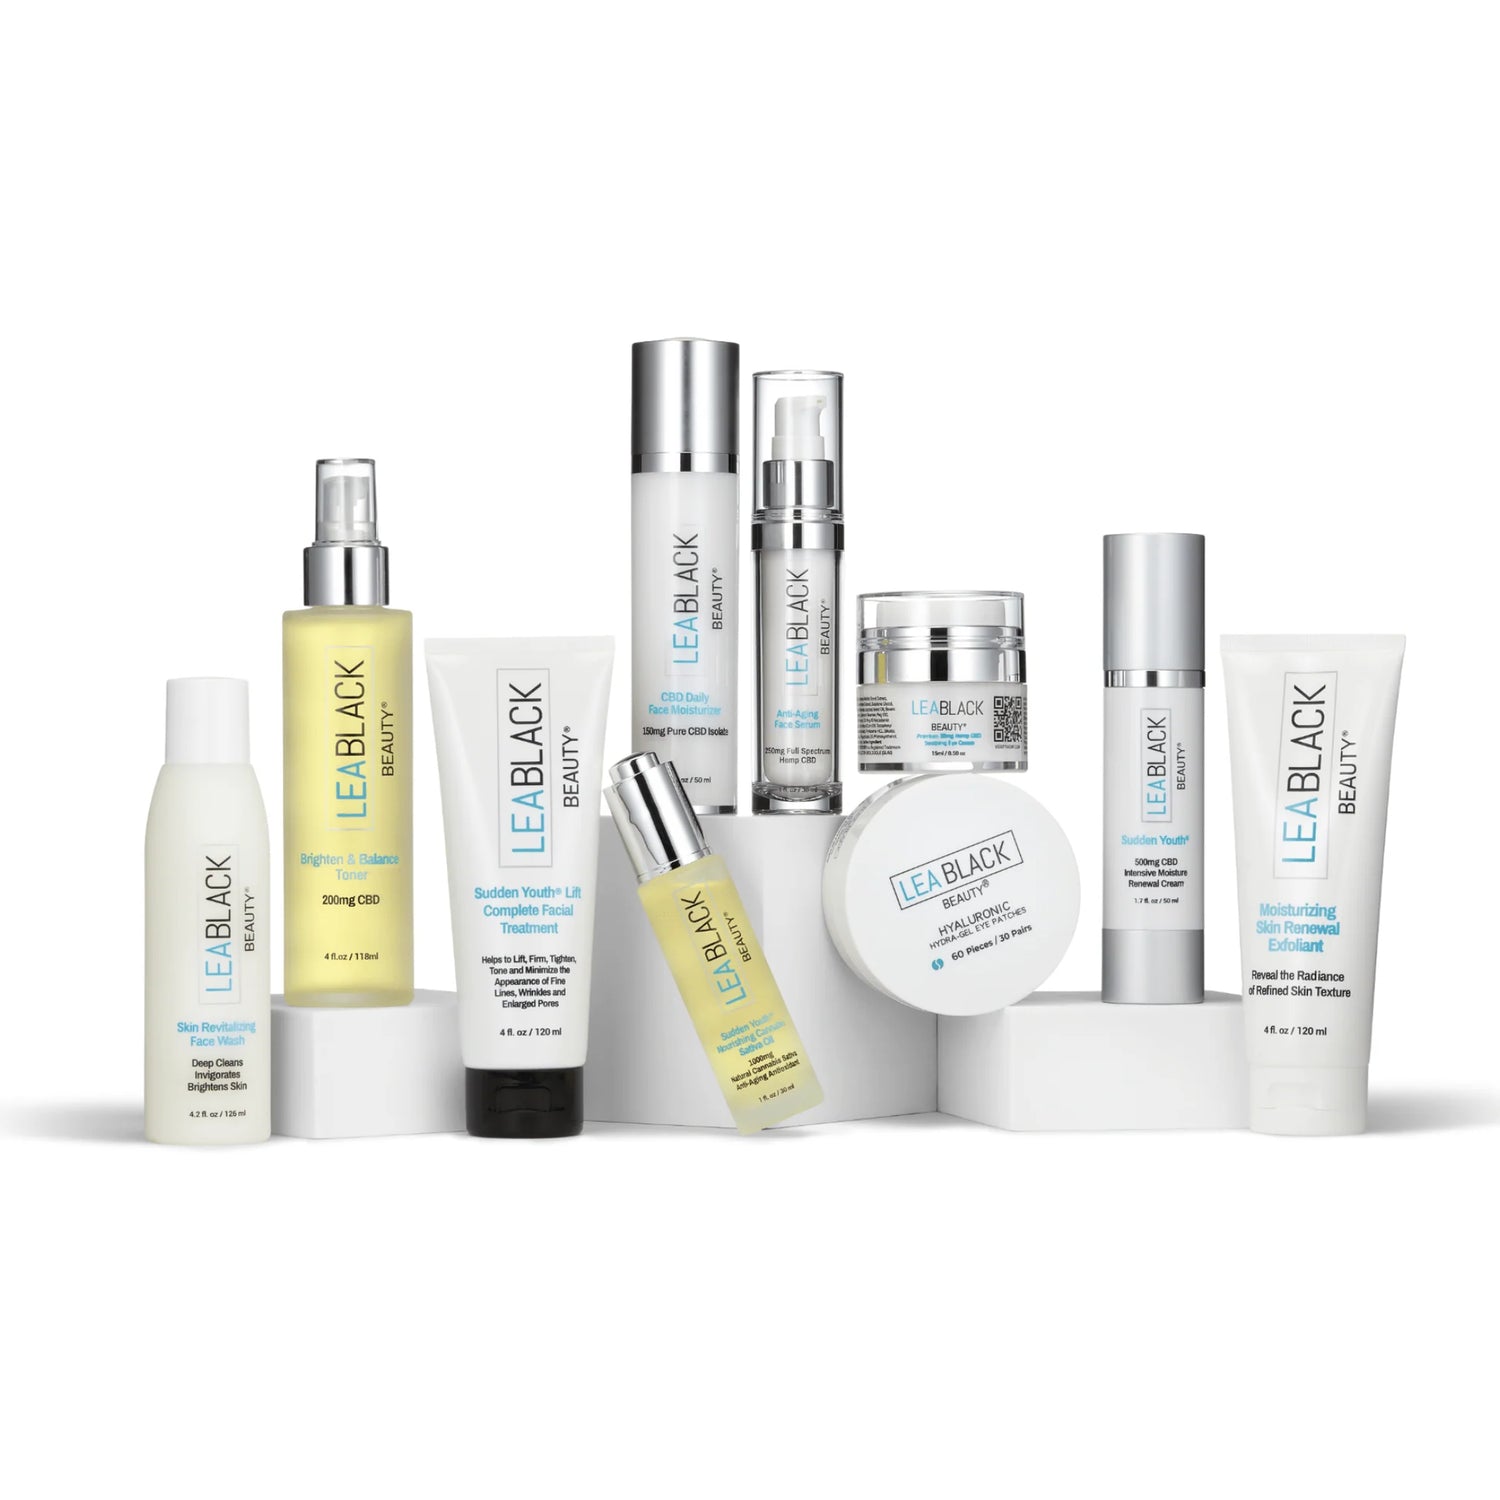 The Lea Black Beauty® Ultimate Skincare Collection